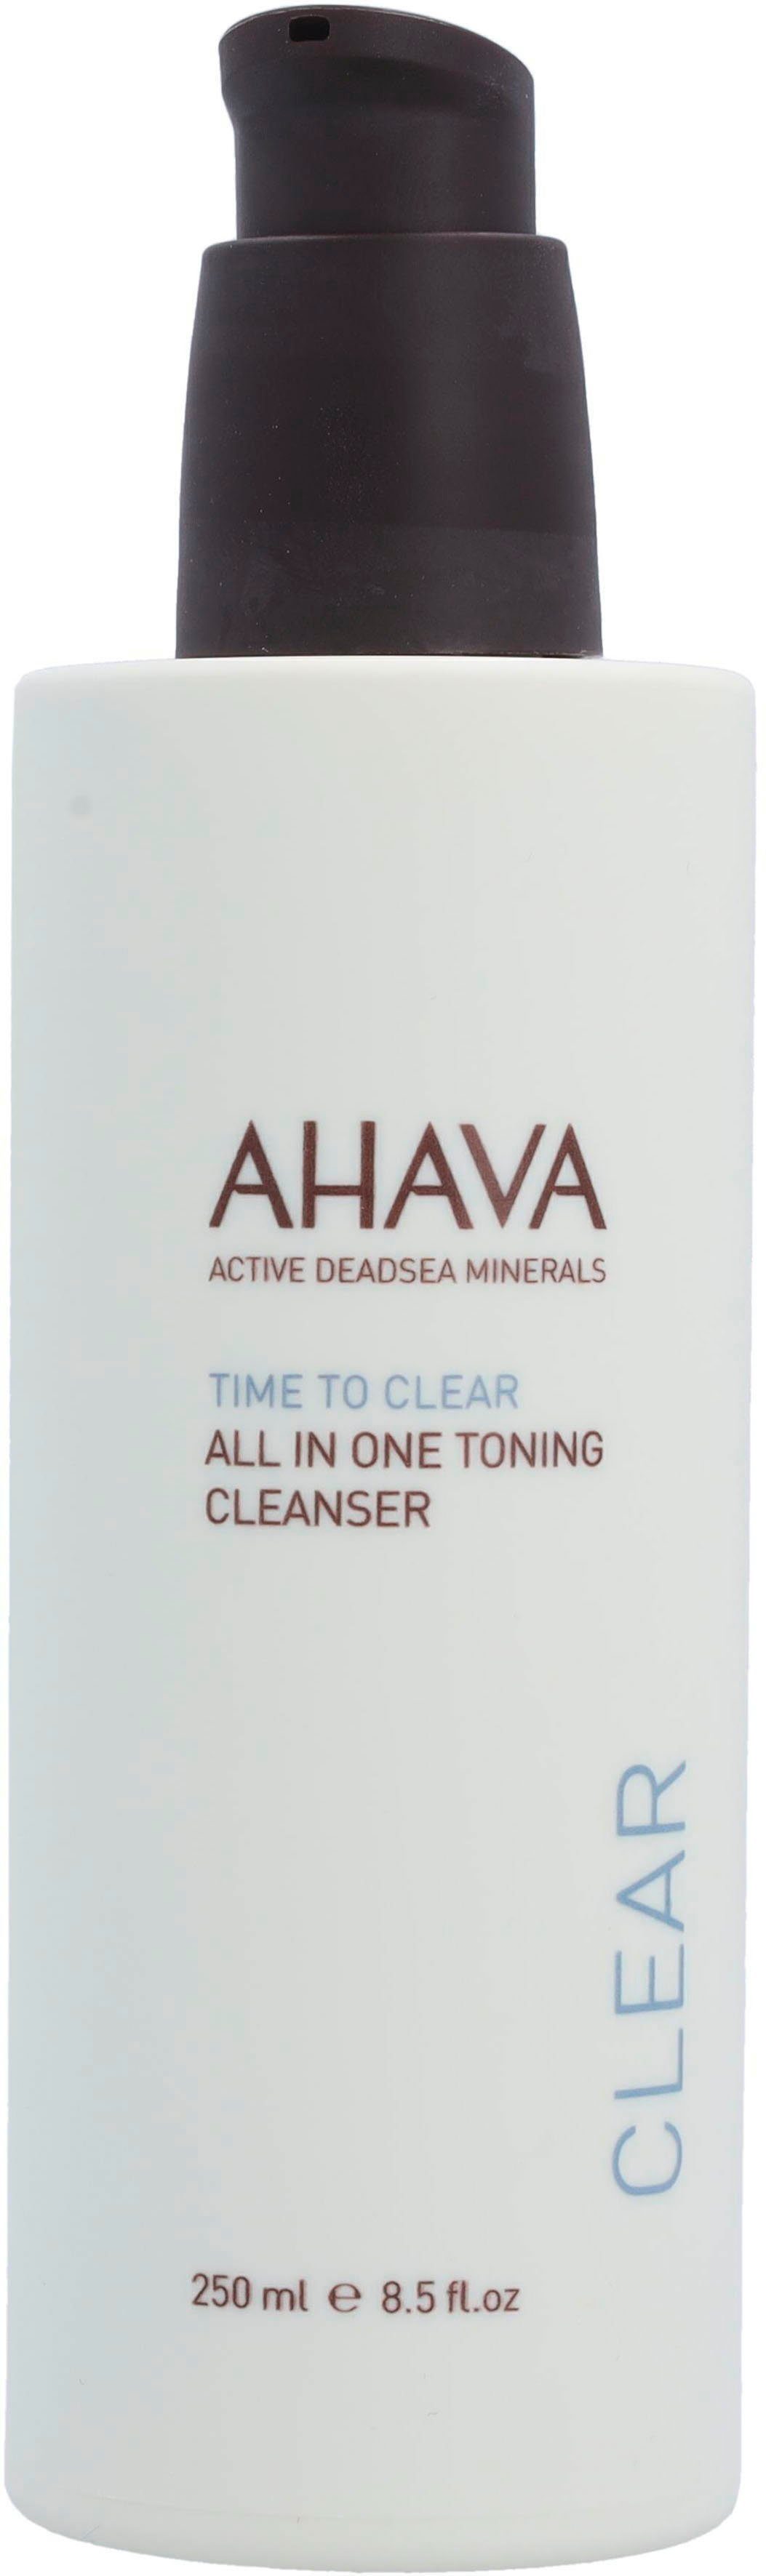 All One Gesichts-Reinigungslotion Cleanser Toning In Clear To Time AHAVA